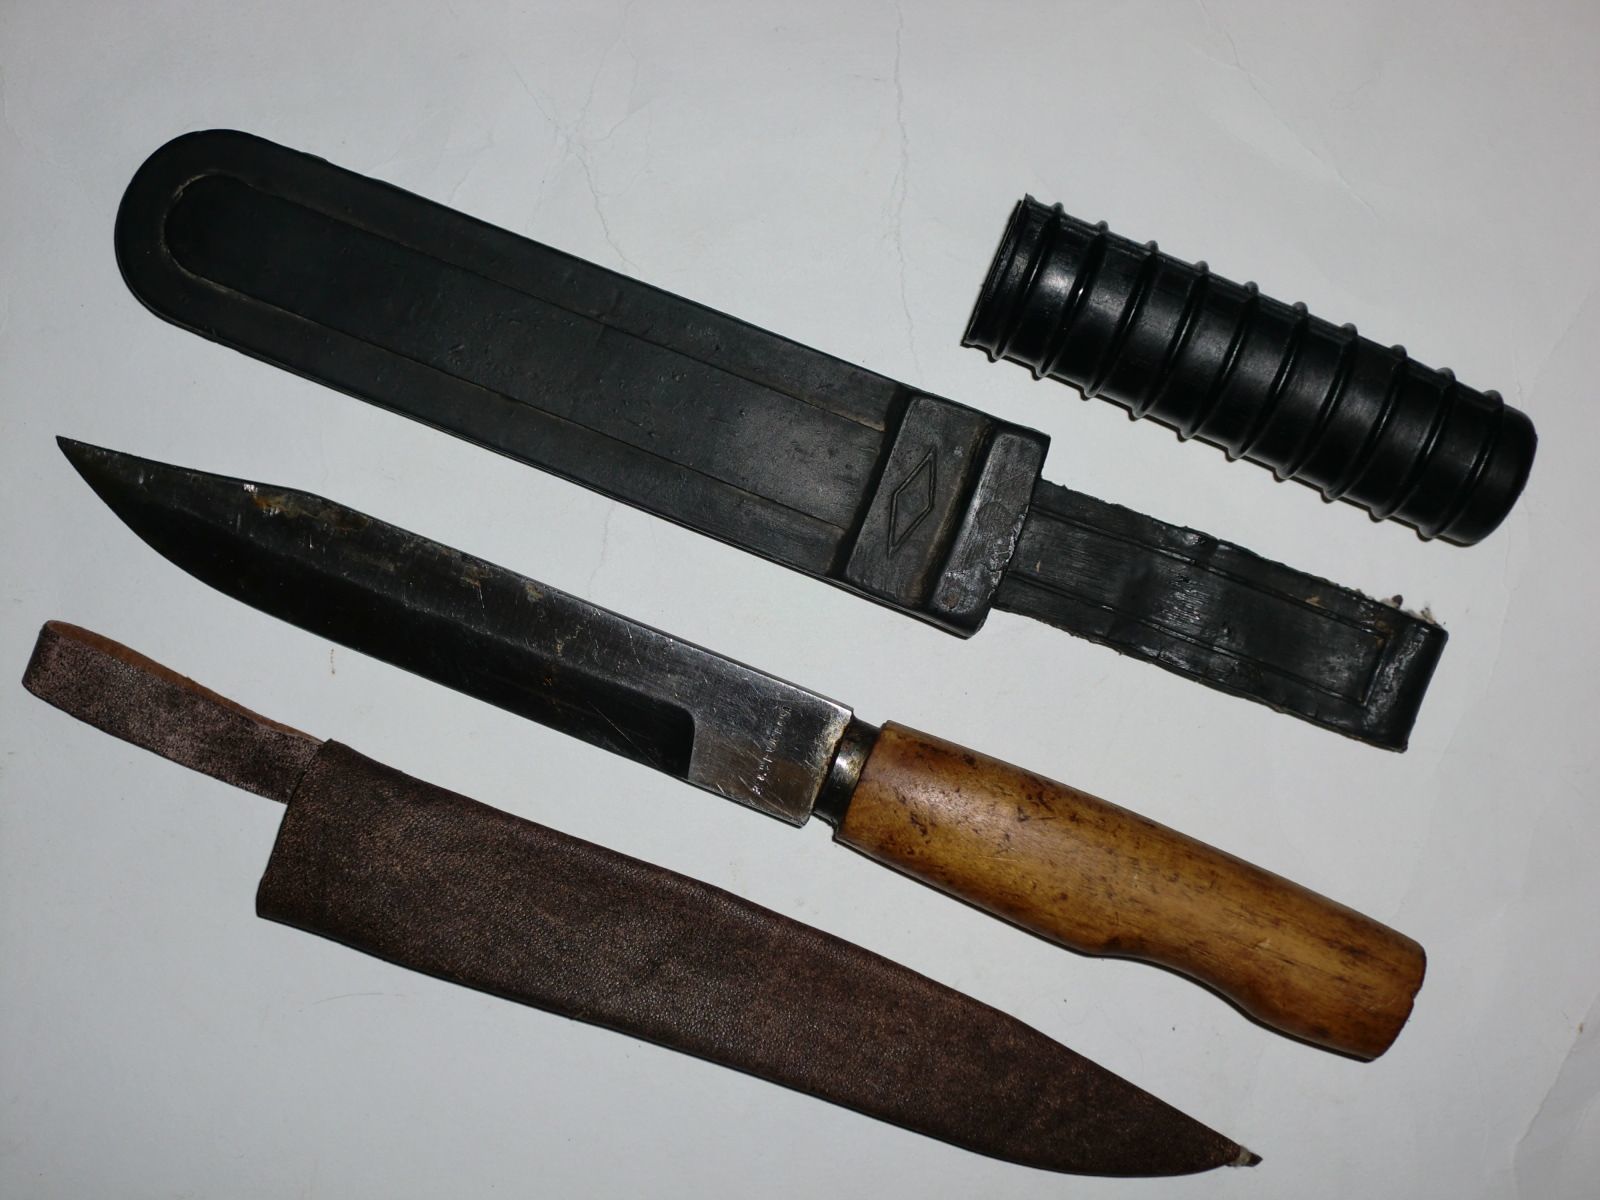 Soldier's knife. A few words and some photos - Knife, Army, Tools, Story, Longpost